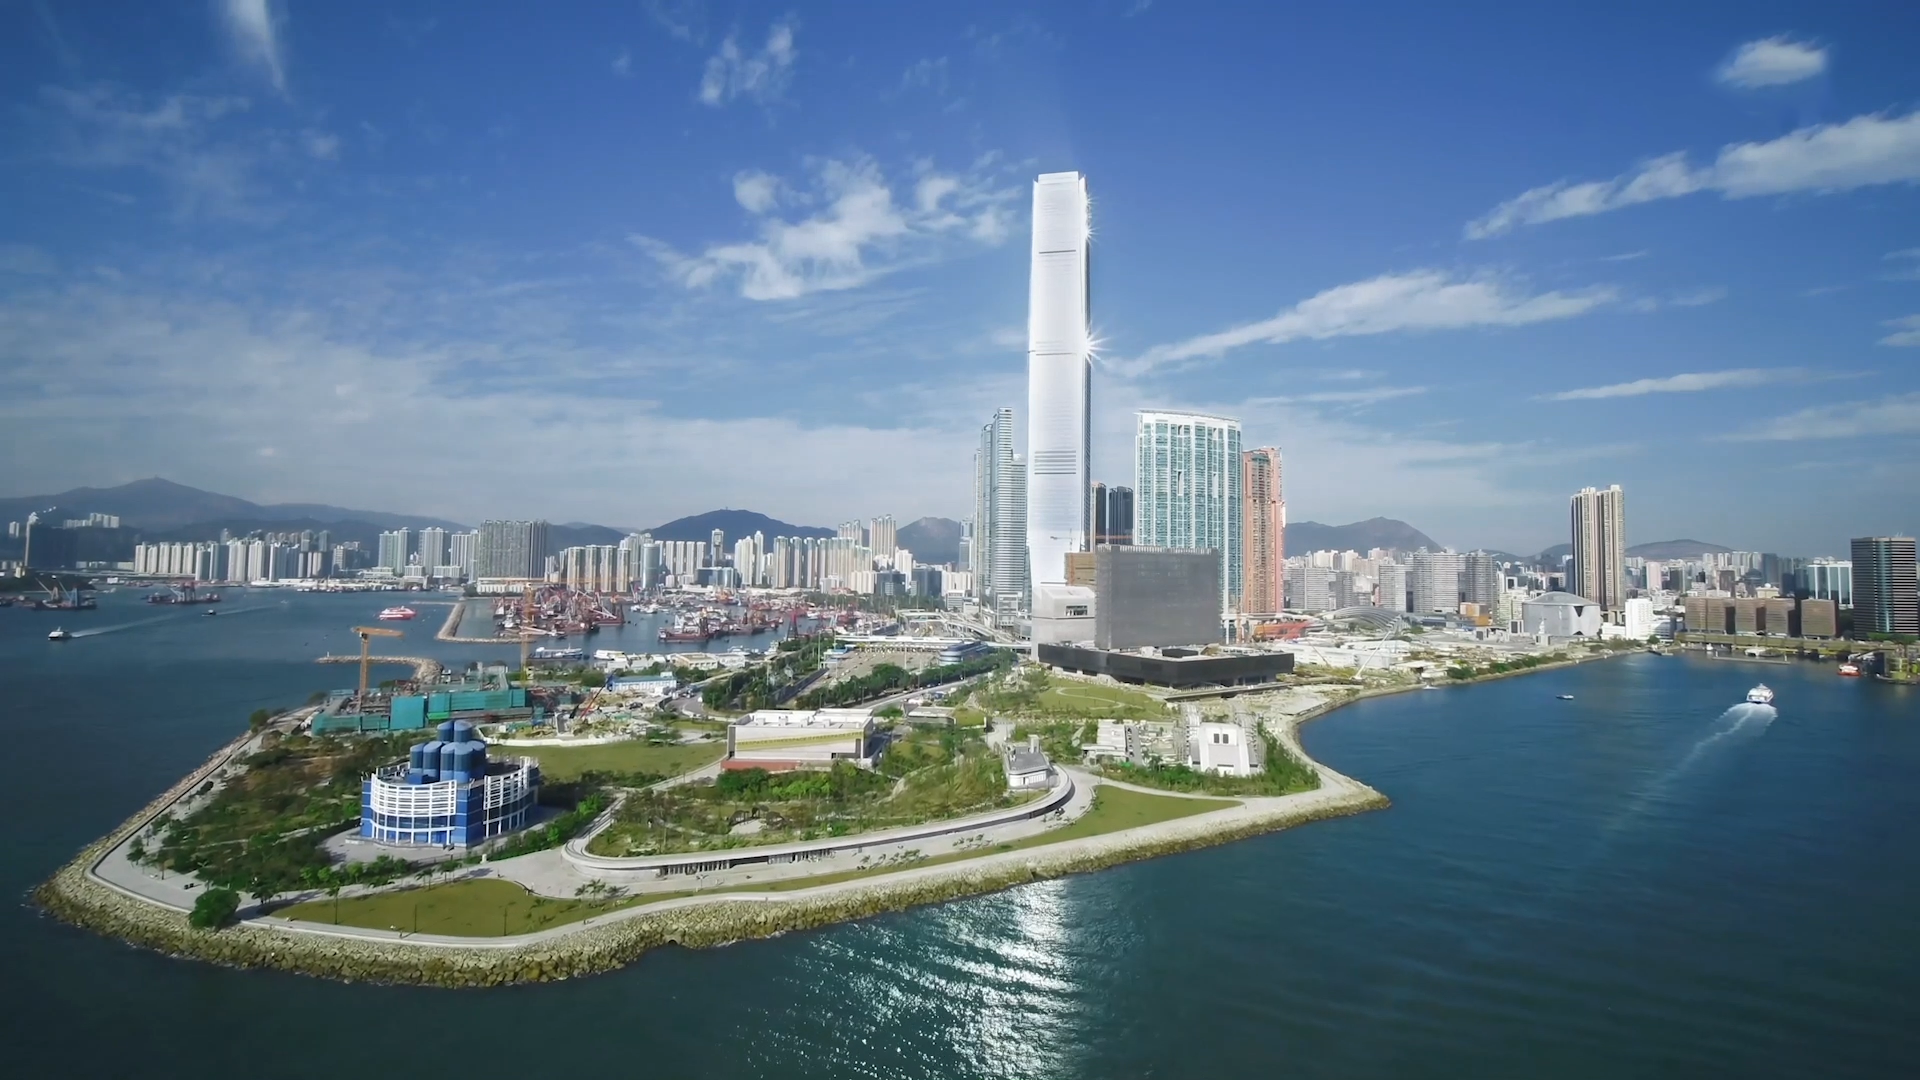 Hong Kong’s West Kowloon Cultural District is being developed on the westernmost tip of the Kowloon peninsula.